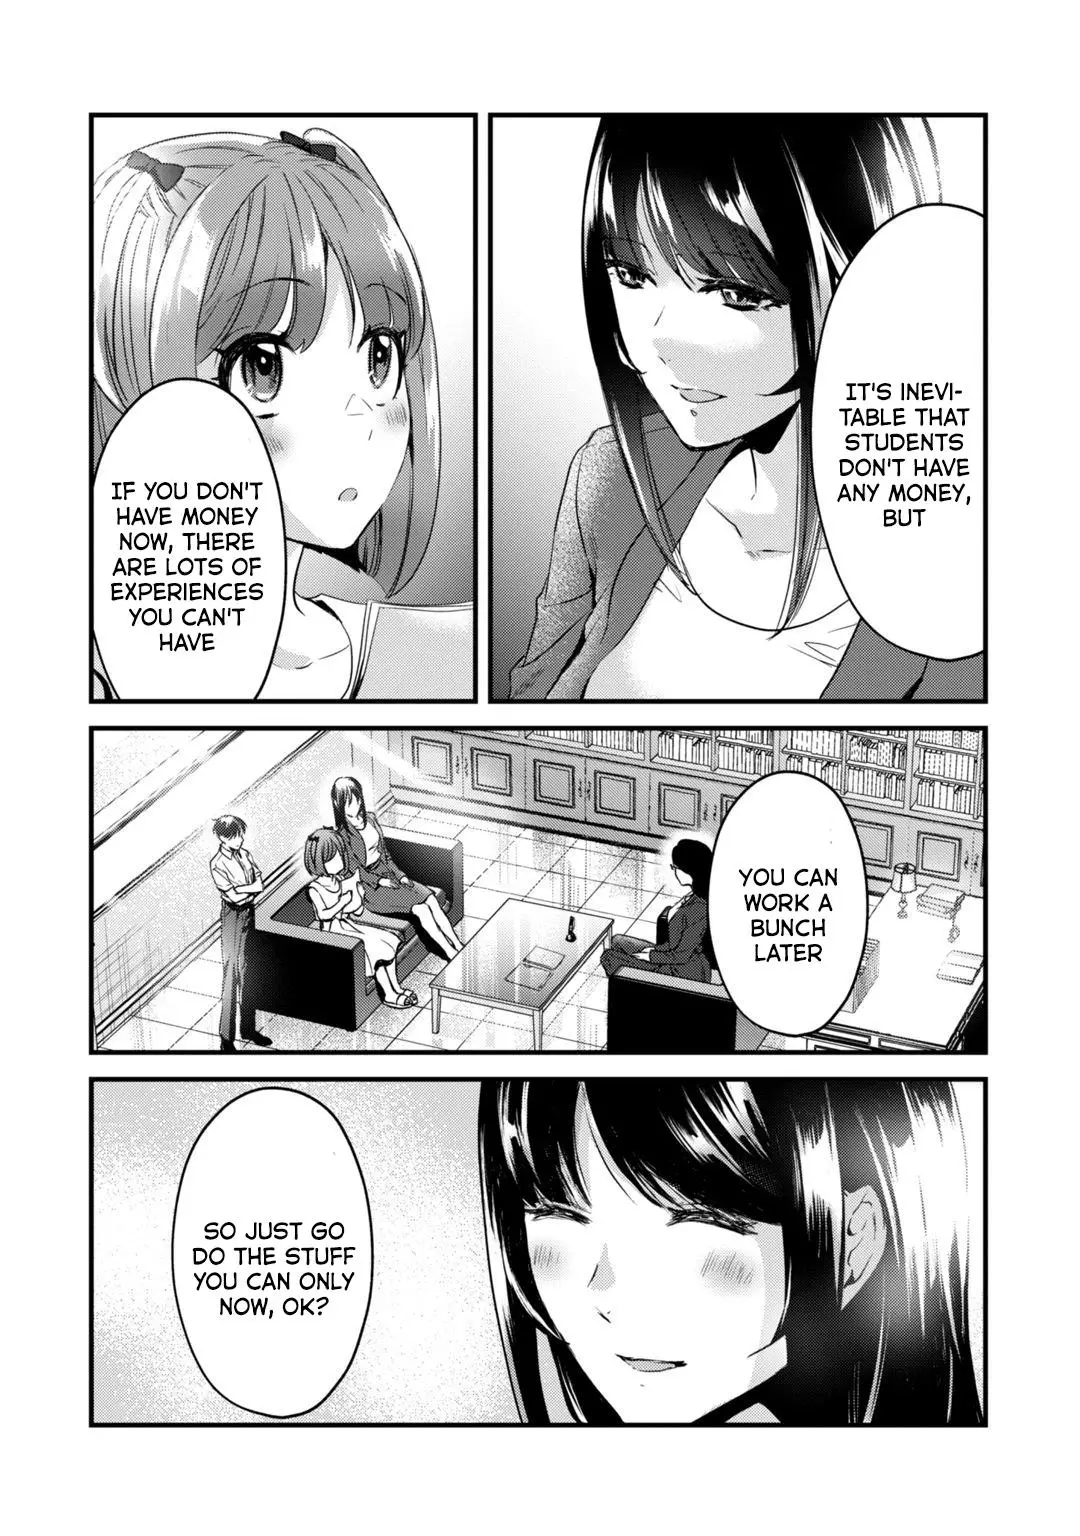 It’S Fun Having A 300,000 Yen A Month Job Welcoming Home An Onee-San Who Doesn’T Find Meaning In A Job That Pays Her 500,000 Yen A Month - 19 page 7-85a7e6f4